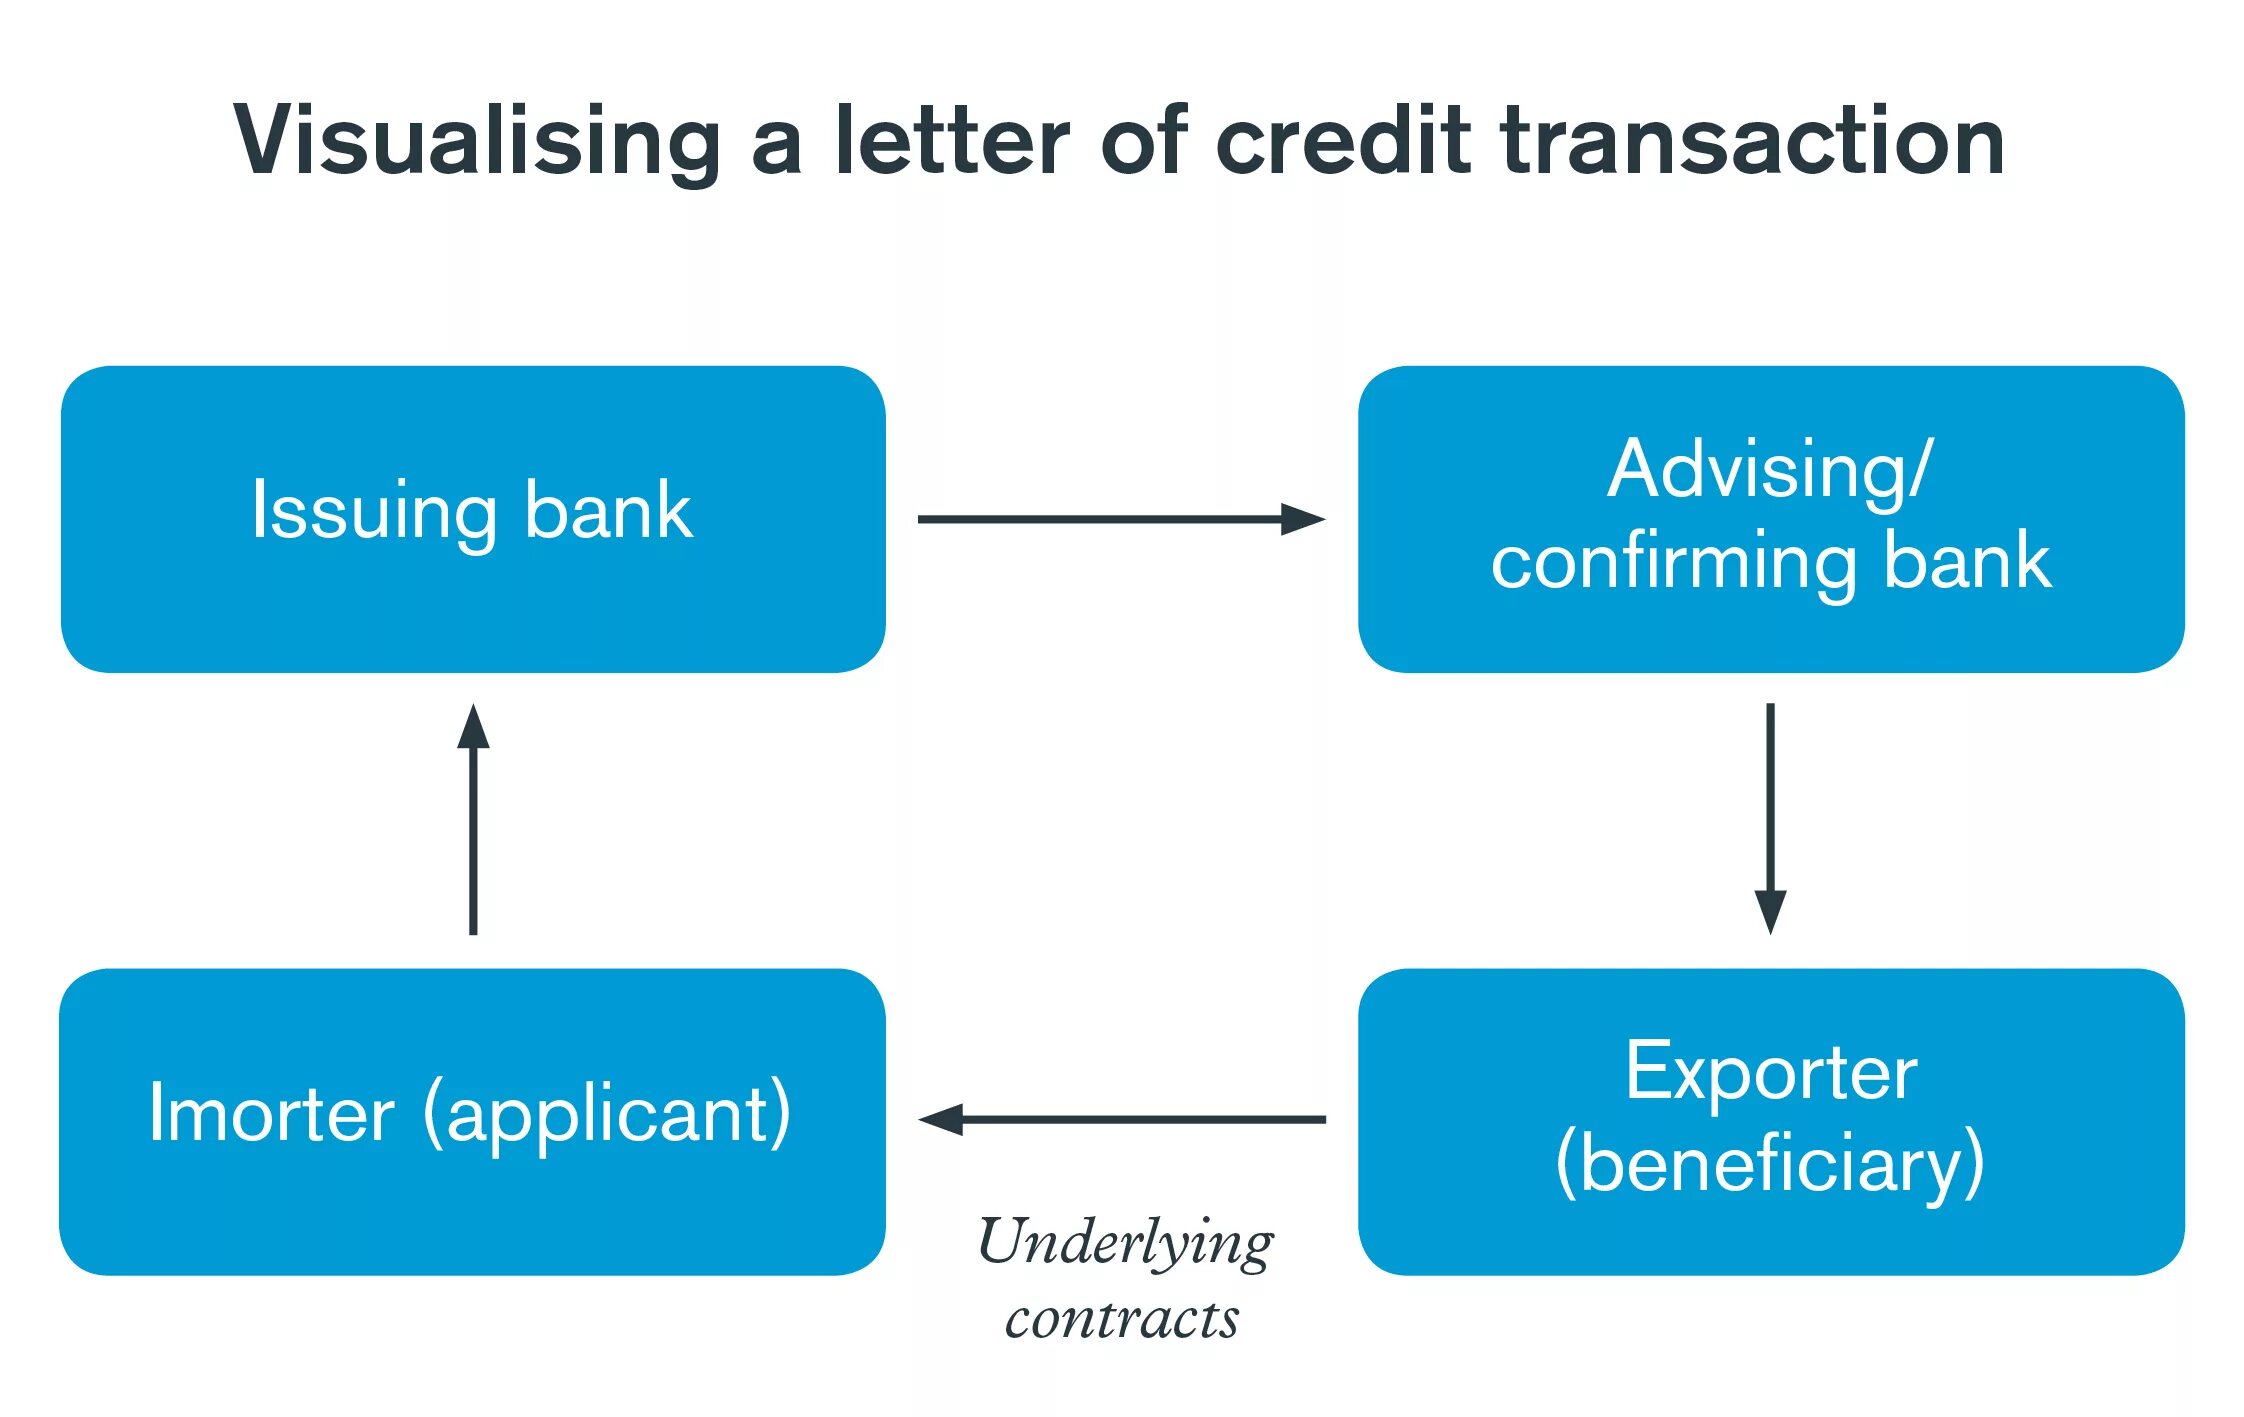 Letter of credit. Letter of credit example. Bank Letter of credit. Letter of credit - LC.